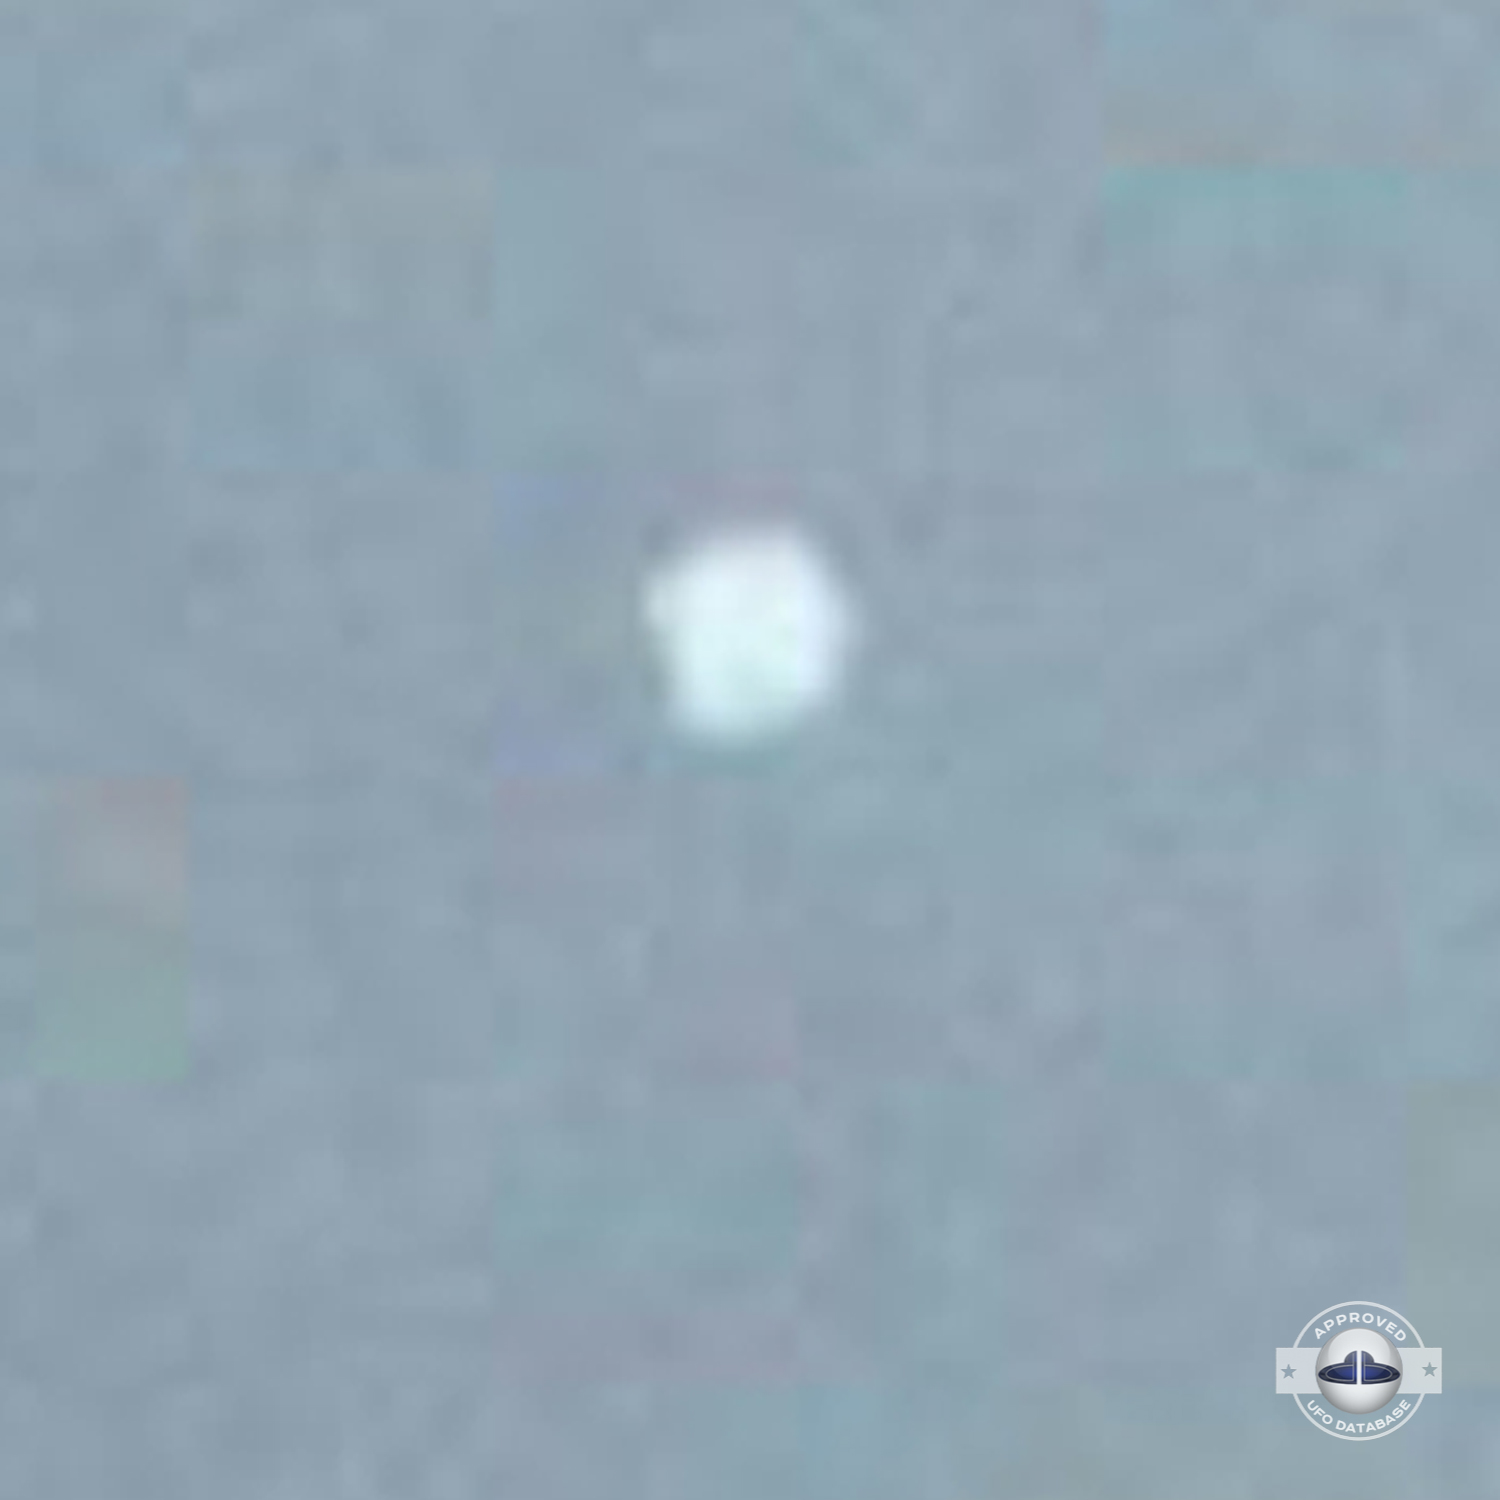 UFO passing over unknown body of water somewhere in Turkey | May 2003 UFO Picture #173-5